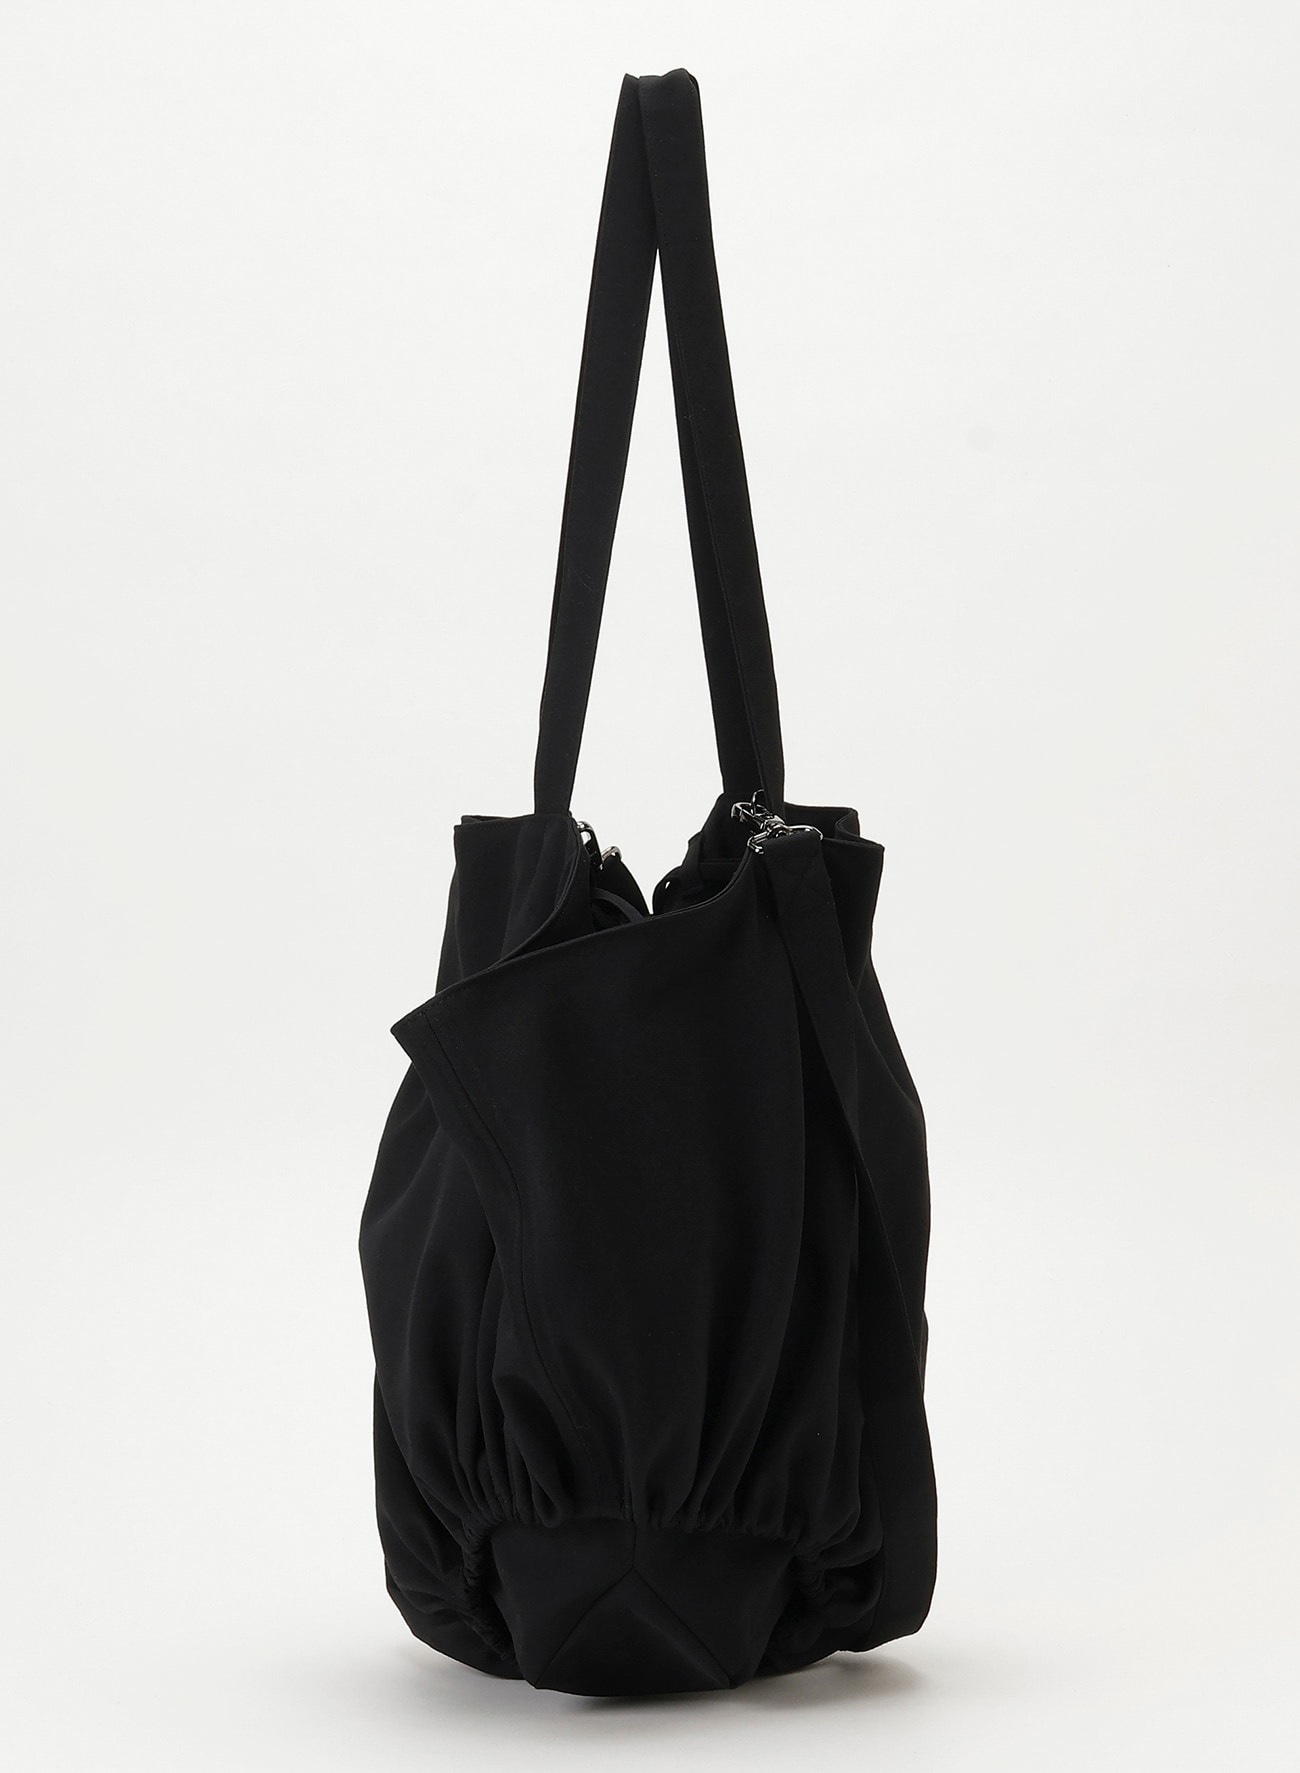 Coquillage tote